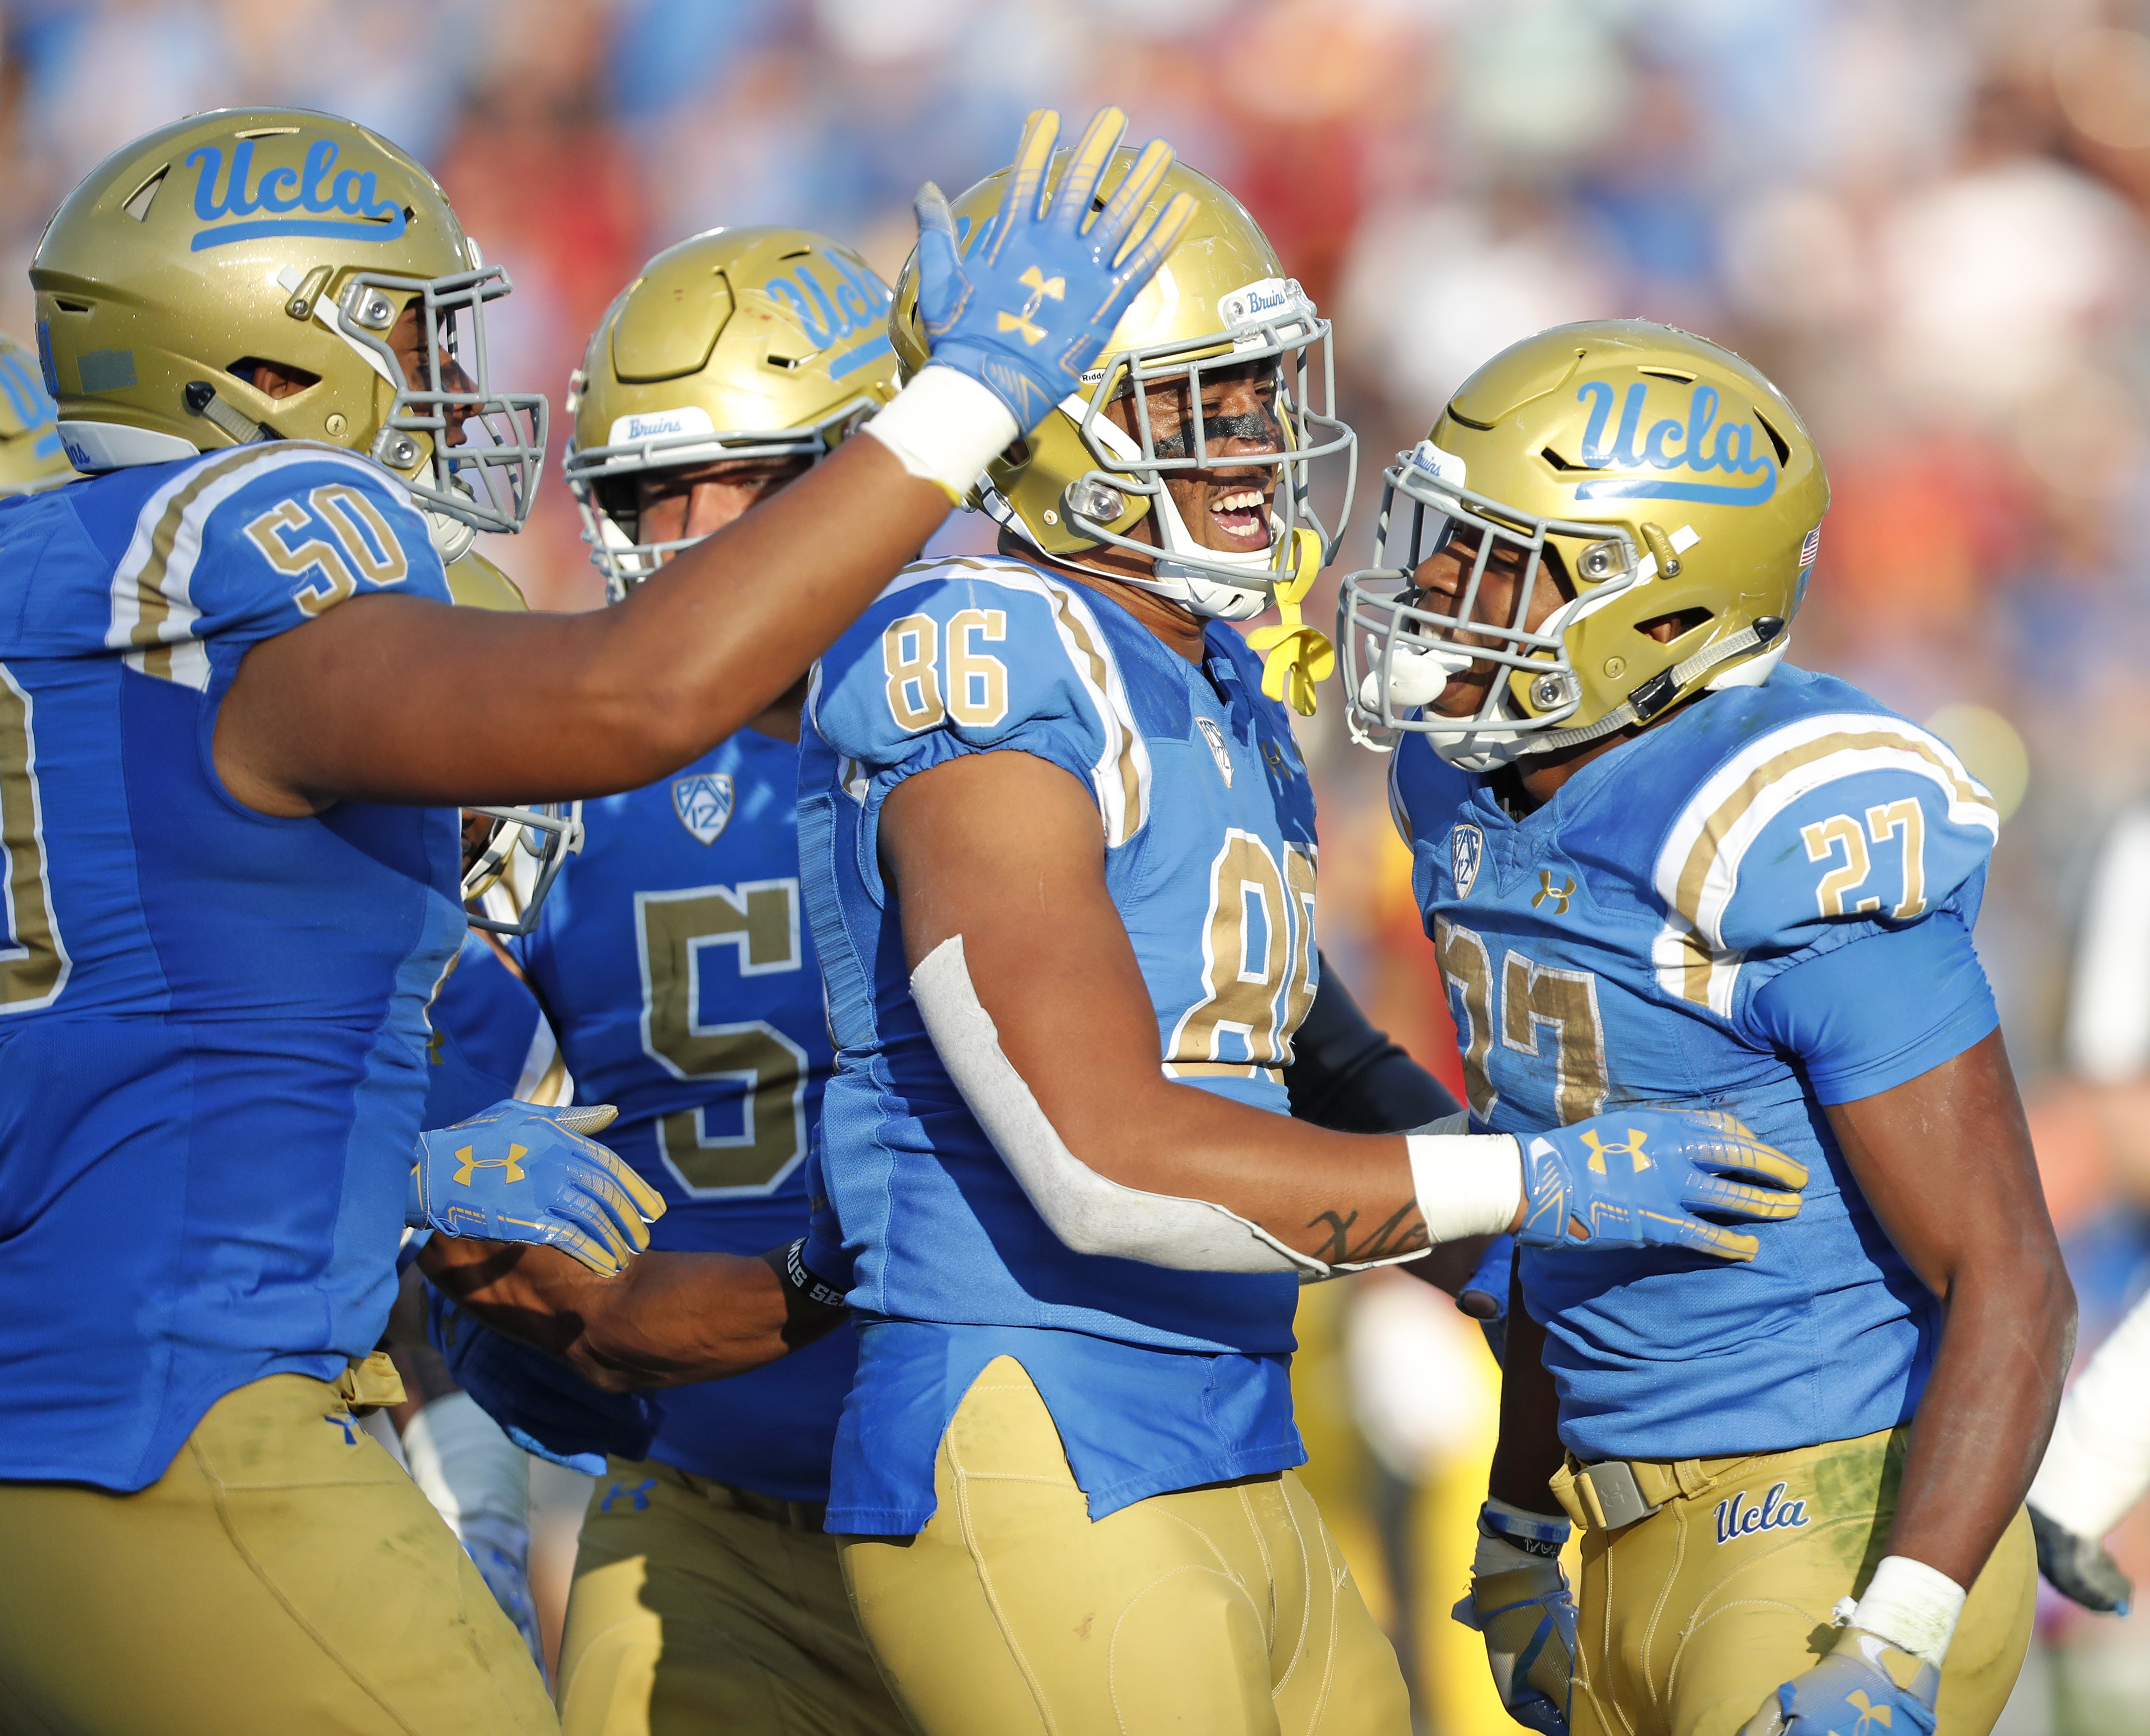 PHOTOS: UCLA's run game slashes USC as uncertainty looms for Trojans